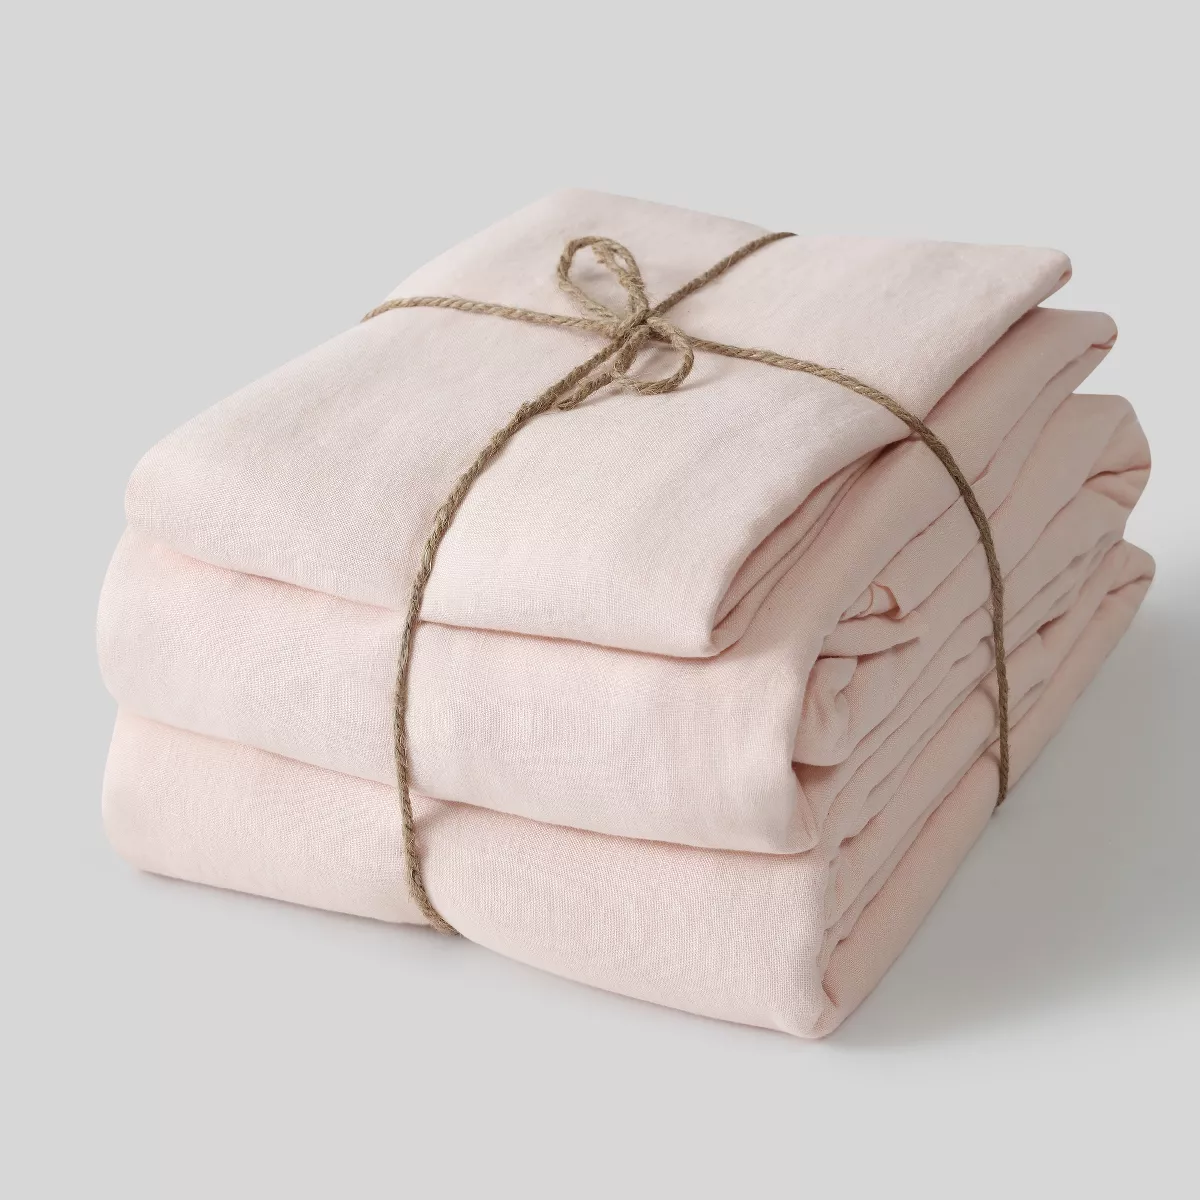 Two linen pillowcases, a fitted linen sheet, and a flat linen sheet tied together with rope